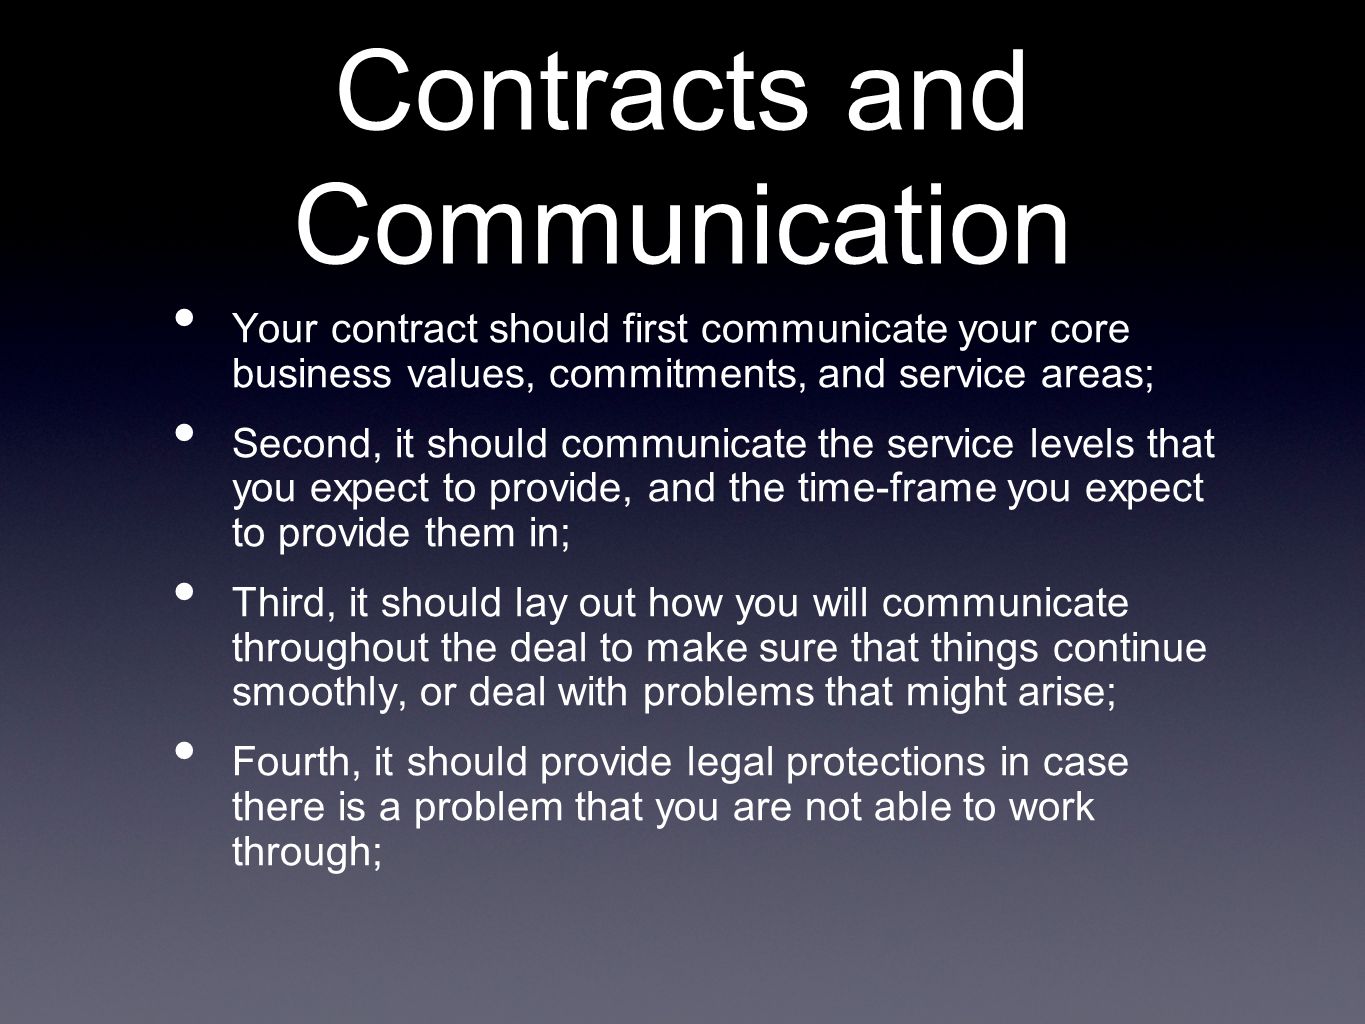 Contracts and Communication Your contract should first communicate your core business values, commitments, and service areas; Second, it should communicate the service levels that you expect to provide, and the time-frame you expect to provide them in; Third, it should lay out how you will communicate throughout the deal to make sure that things continue smoothly, or deal with problems that might arise; Fourth, it should provide legal protections in case there is a problem that you are not able to work through;